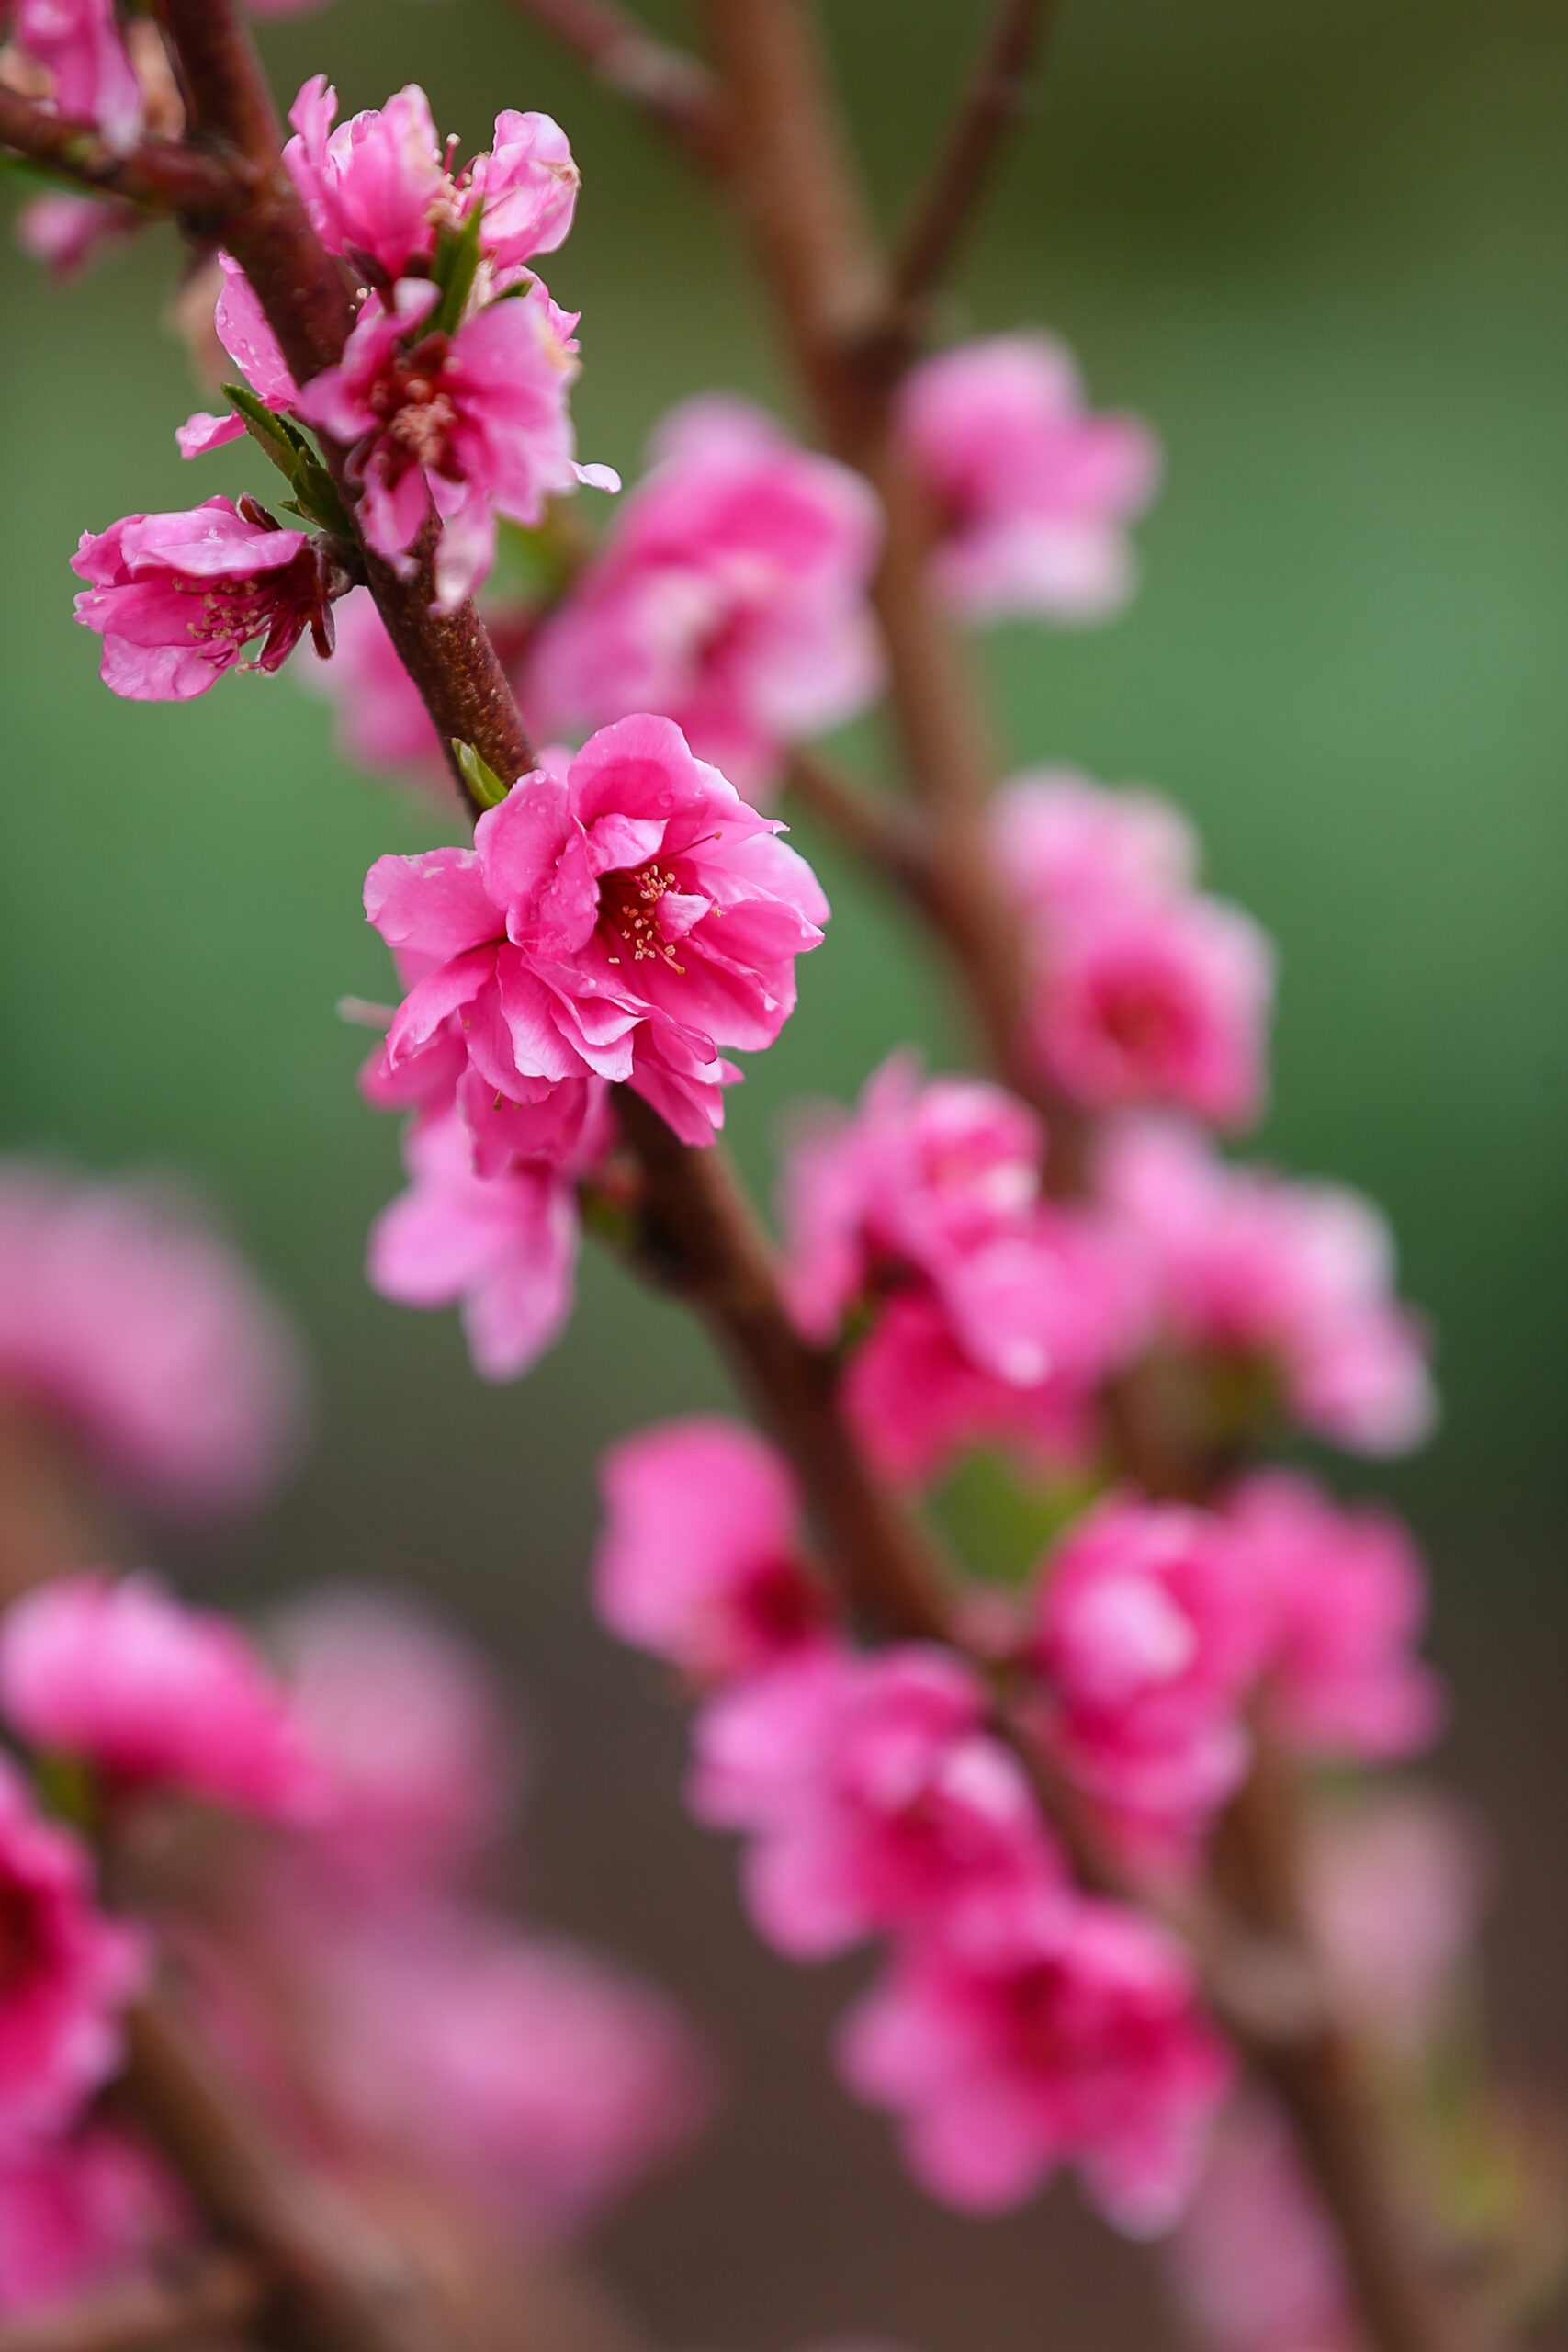 A peach tree blossoms at the culinary garden at Stone Edge Farm in Sonoma on Tuesday, March 15, 2022. (Christopher Chung/ The Press Democrat)